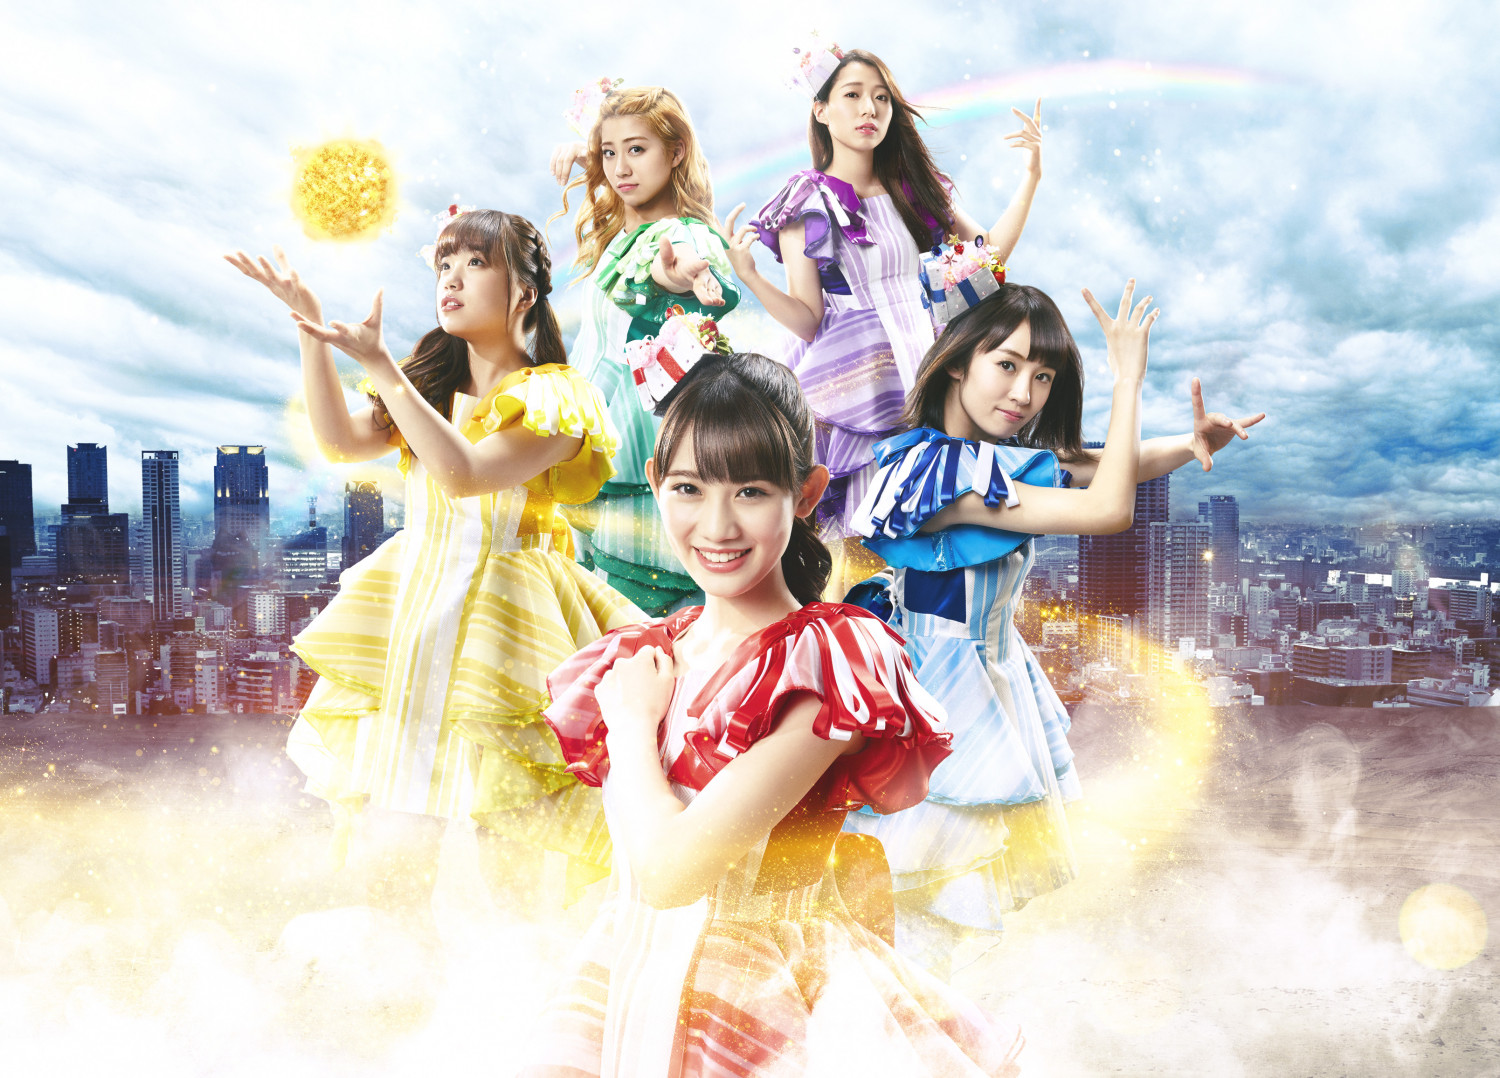 Team Syachihoko Releases New MV and Becomes Happy Dancing Avengers!